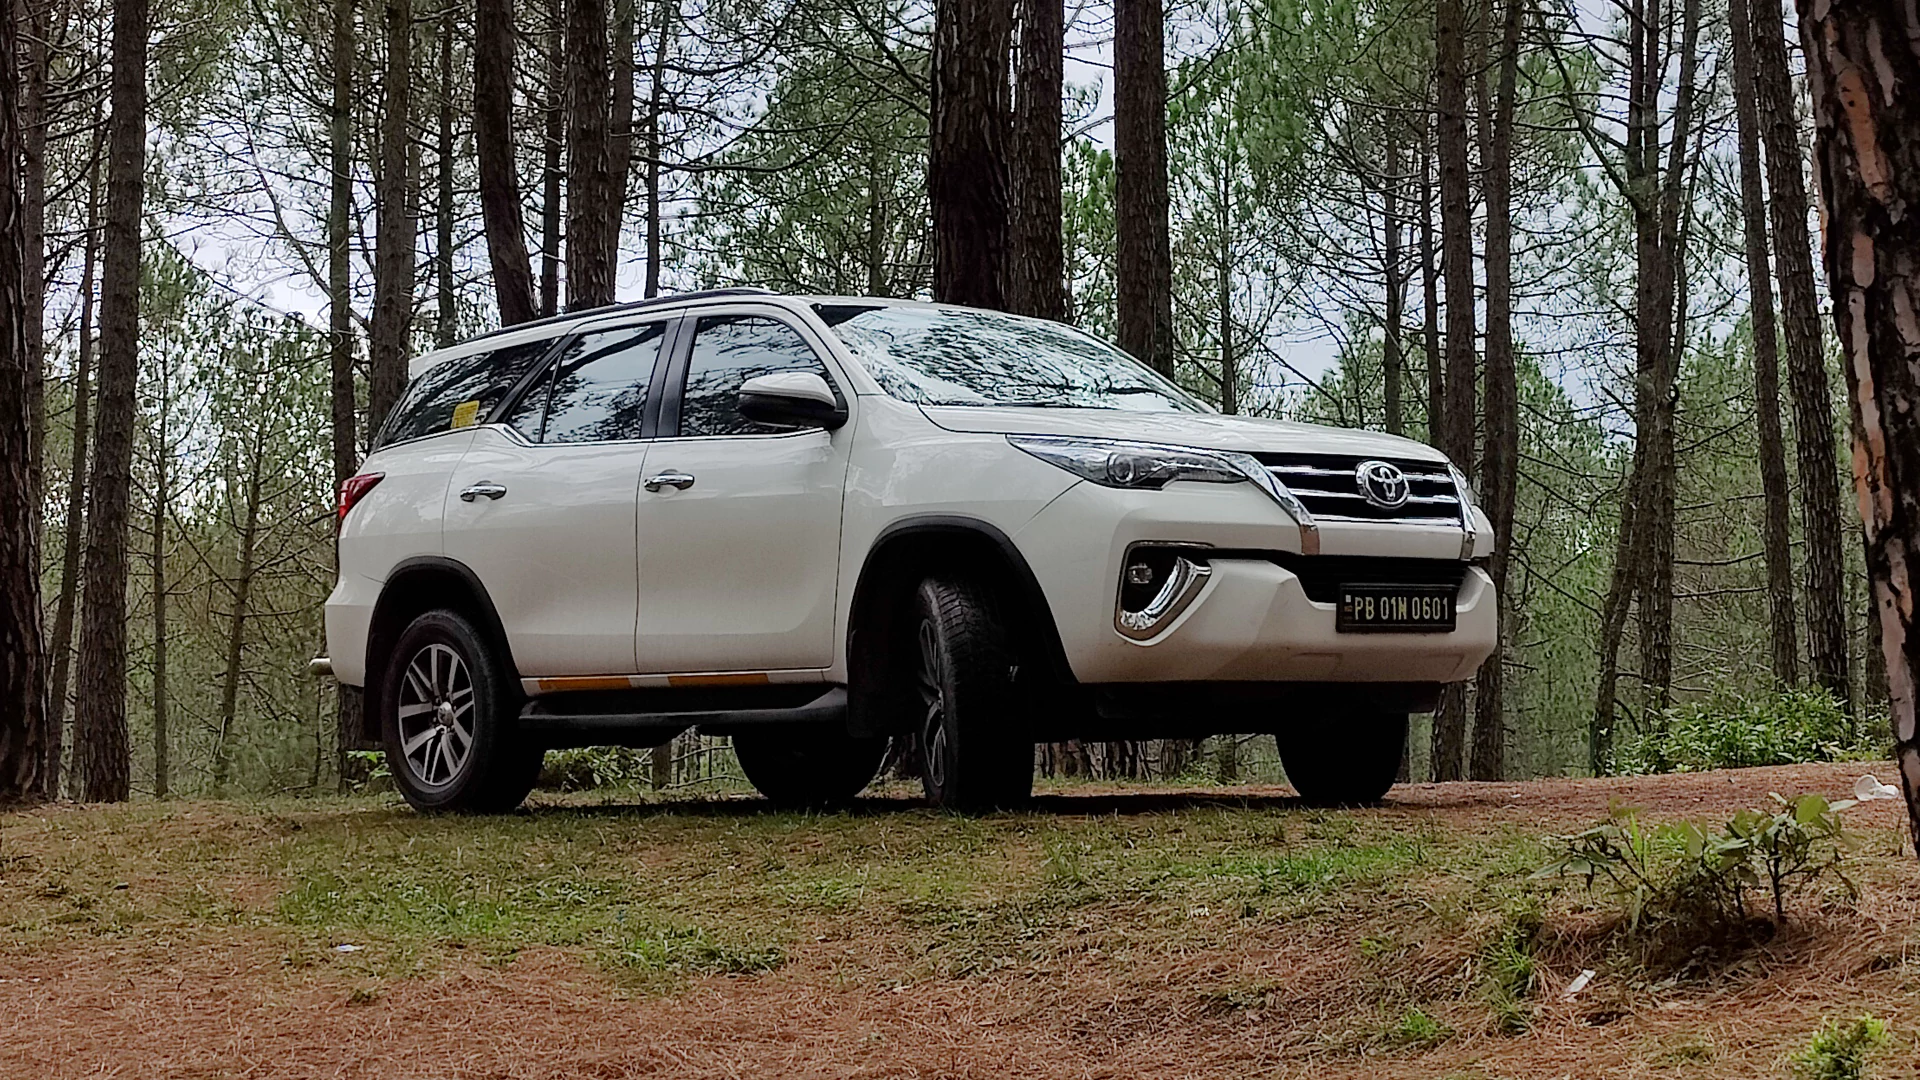 Toyota Fortuner 4x4 for Off-Road Trip Punjab Car Hire